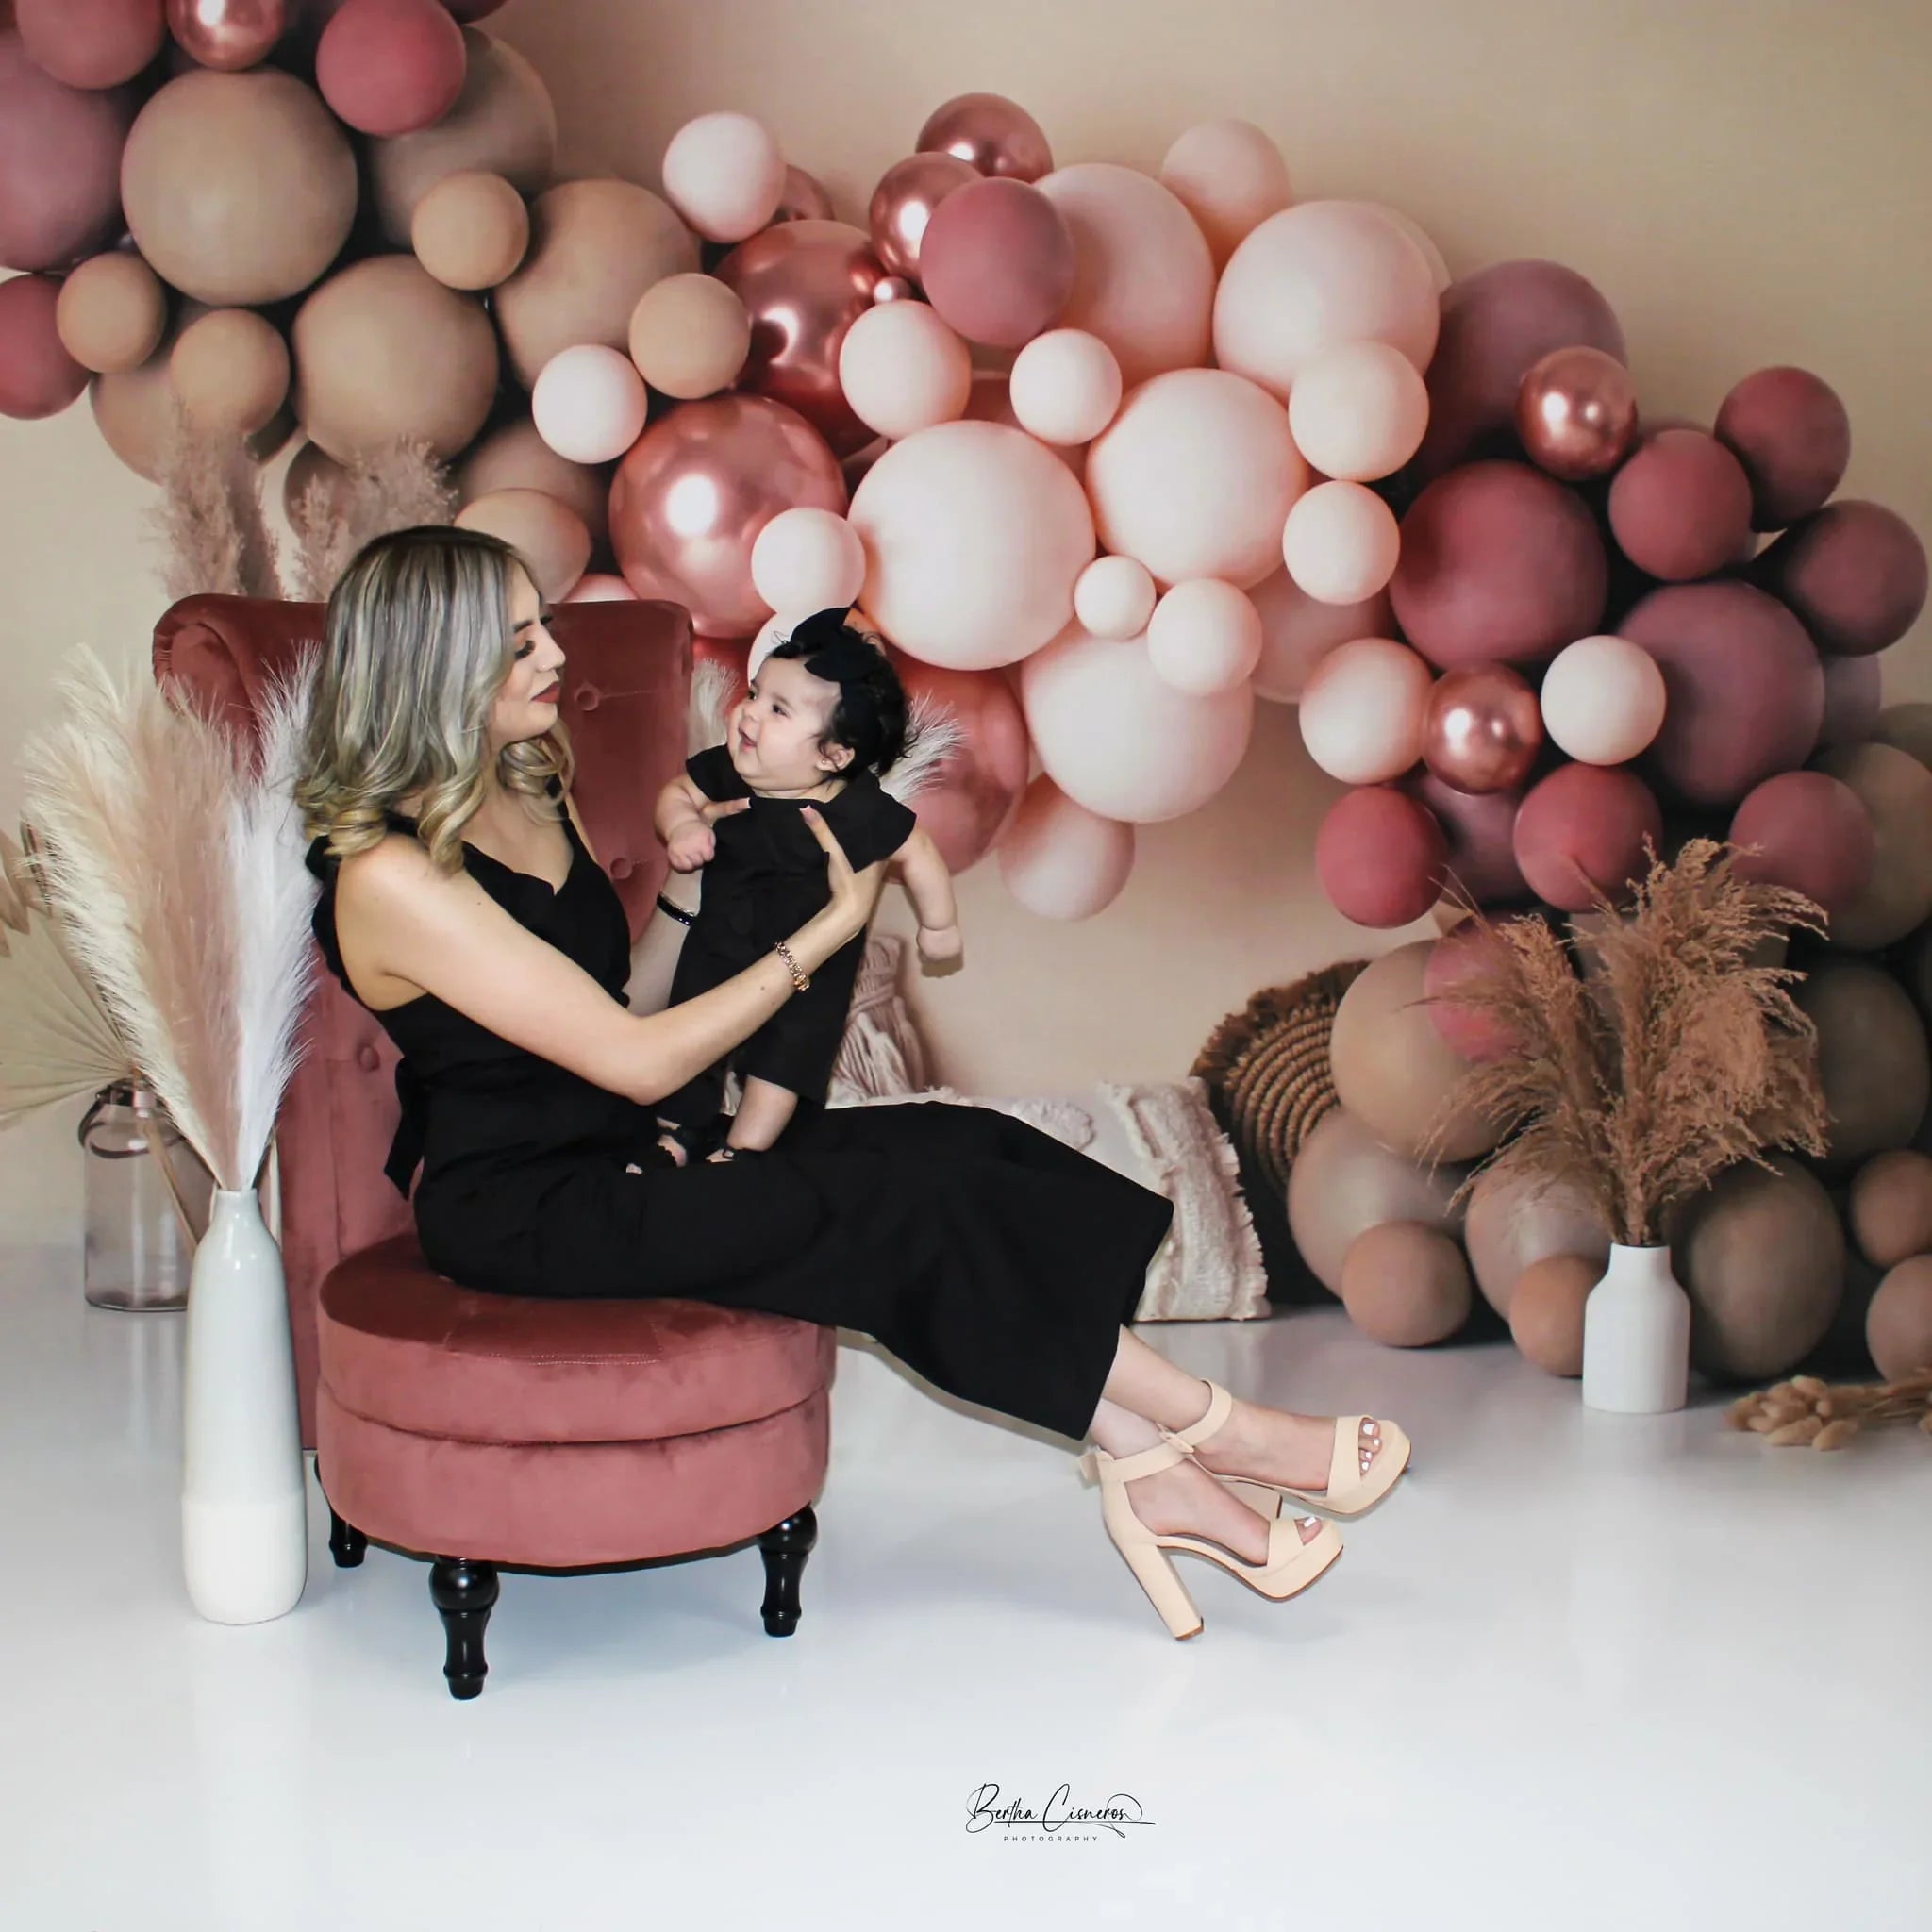 Kate 7x5ft Boho Balloons Backdrop Macrame Pillows Matte Pink Designed by Mandy Ringe Photography (only ship to Canada)